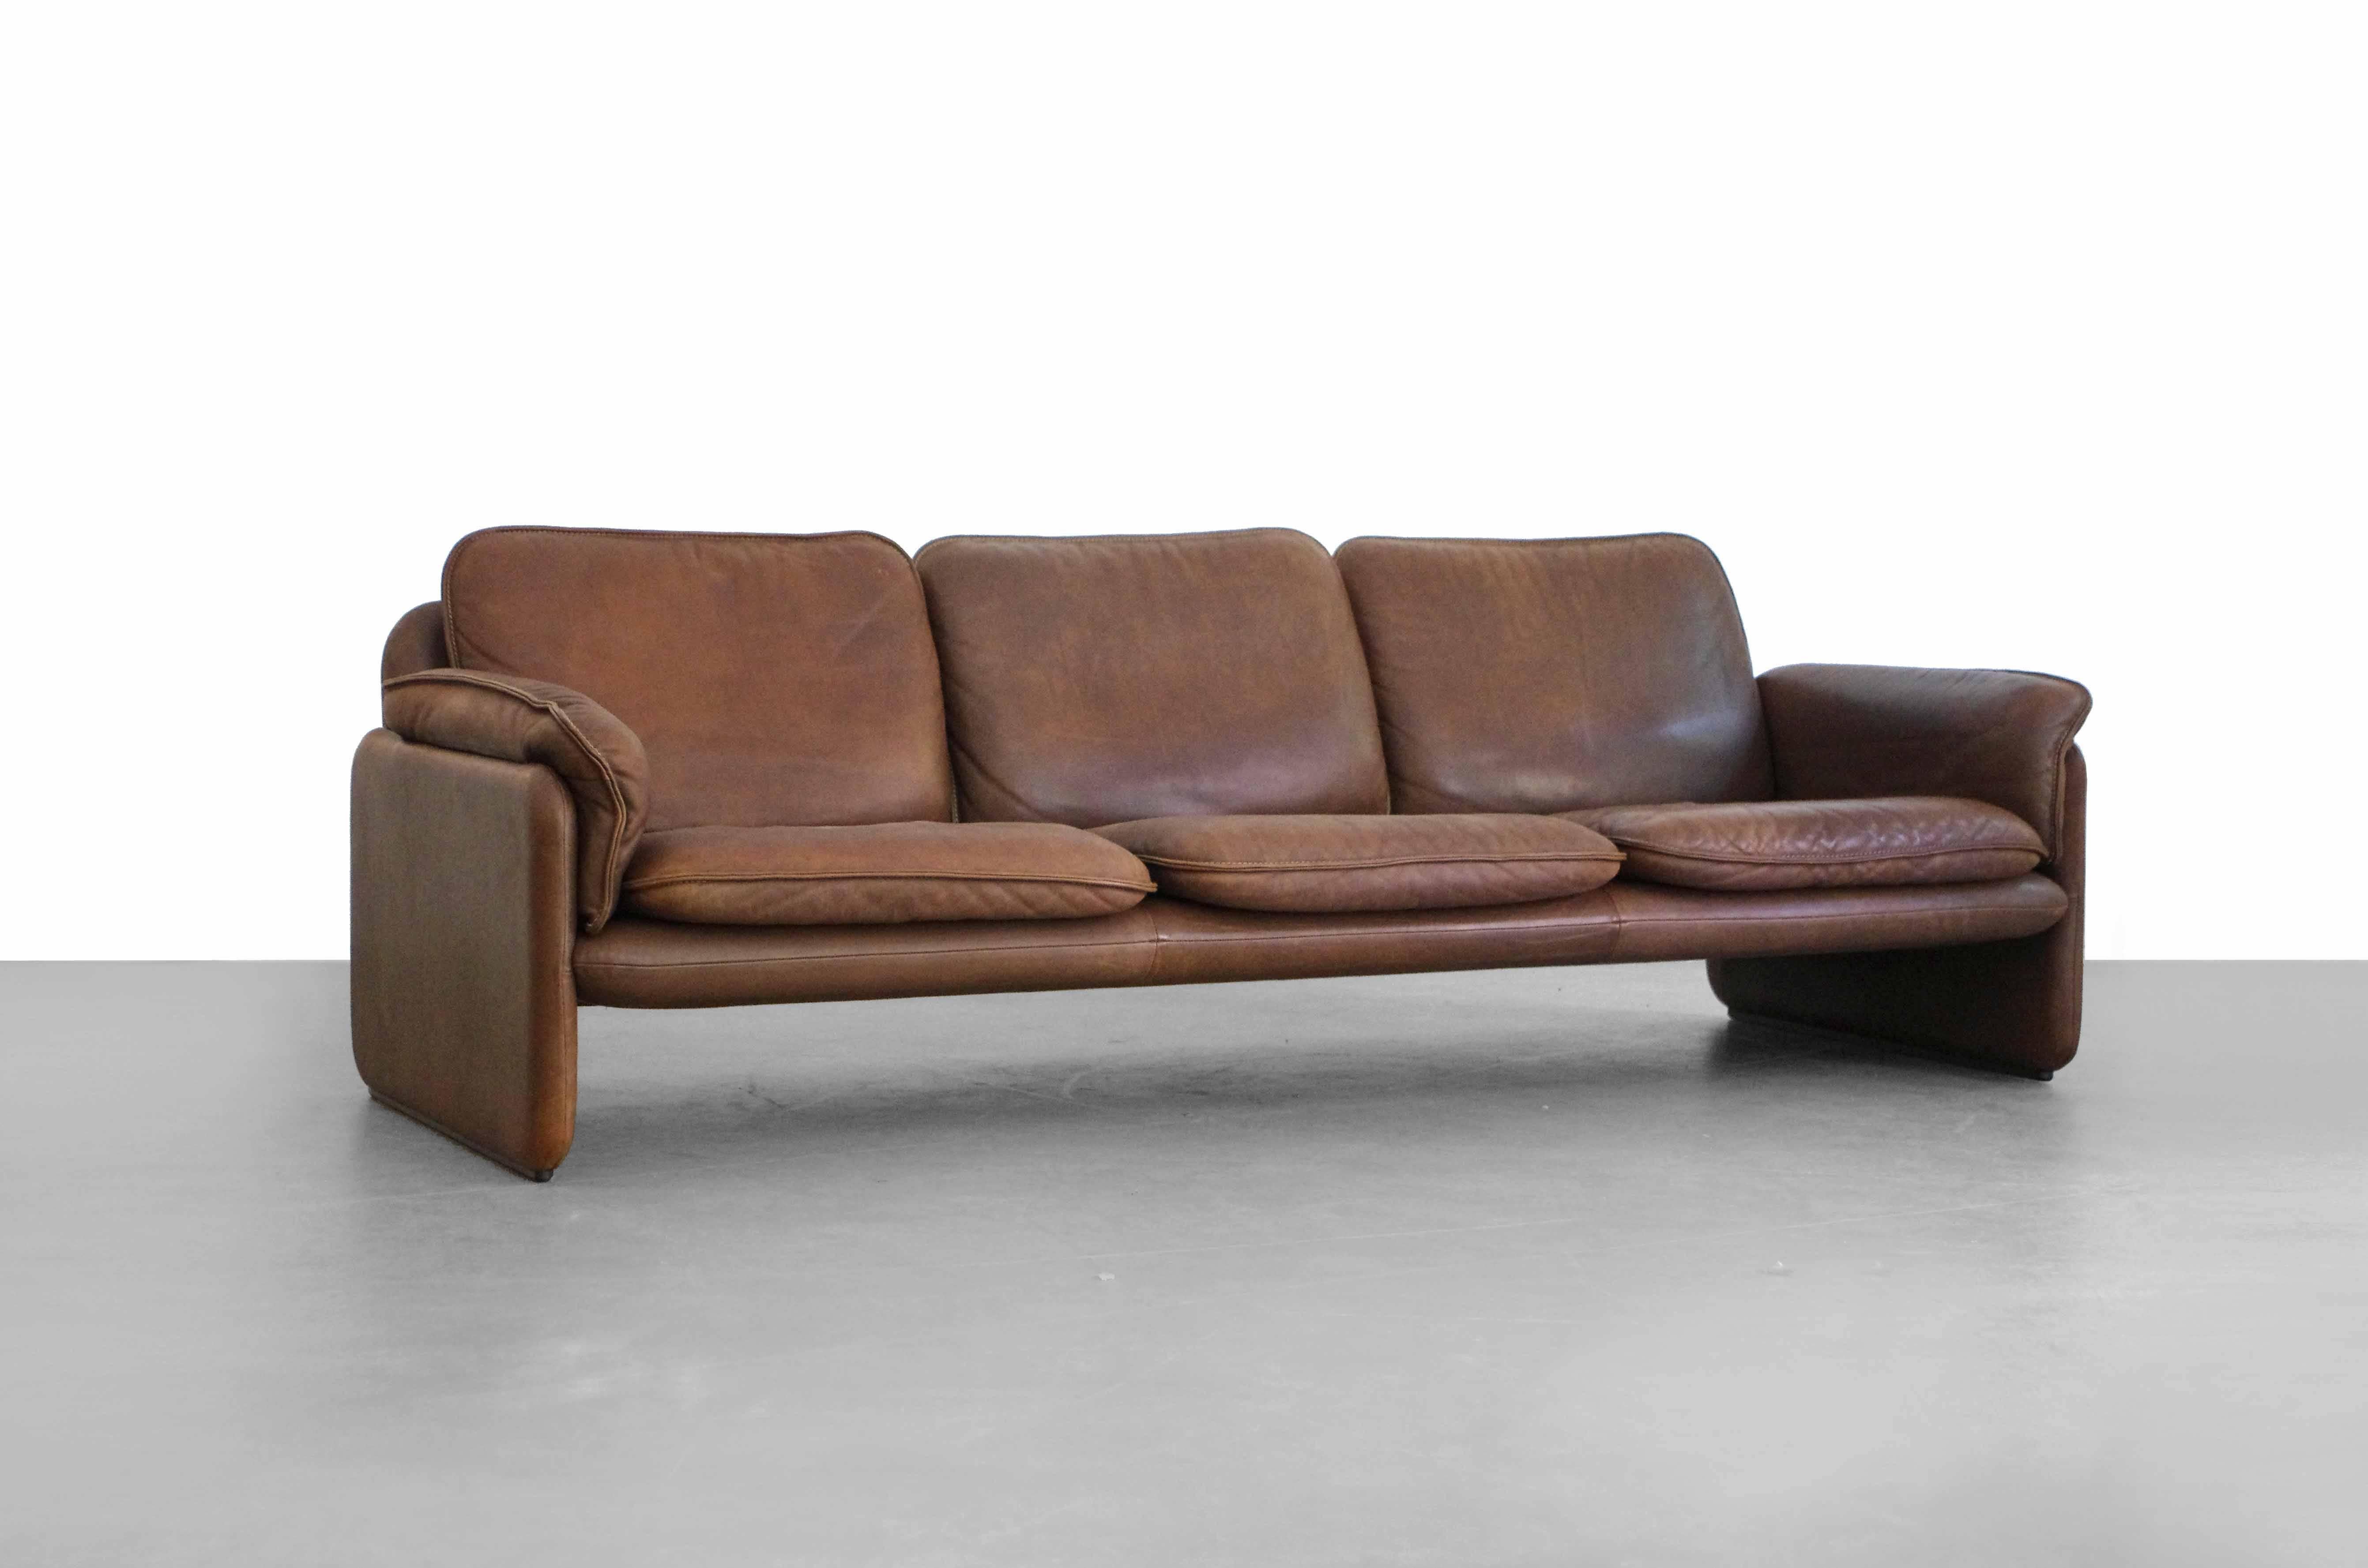 De Sede DS-61 sofa in dark brown leather.
Overall in a good condition. Little wear, leather with patina.